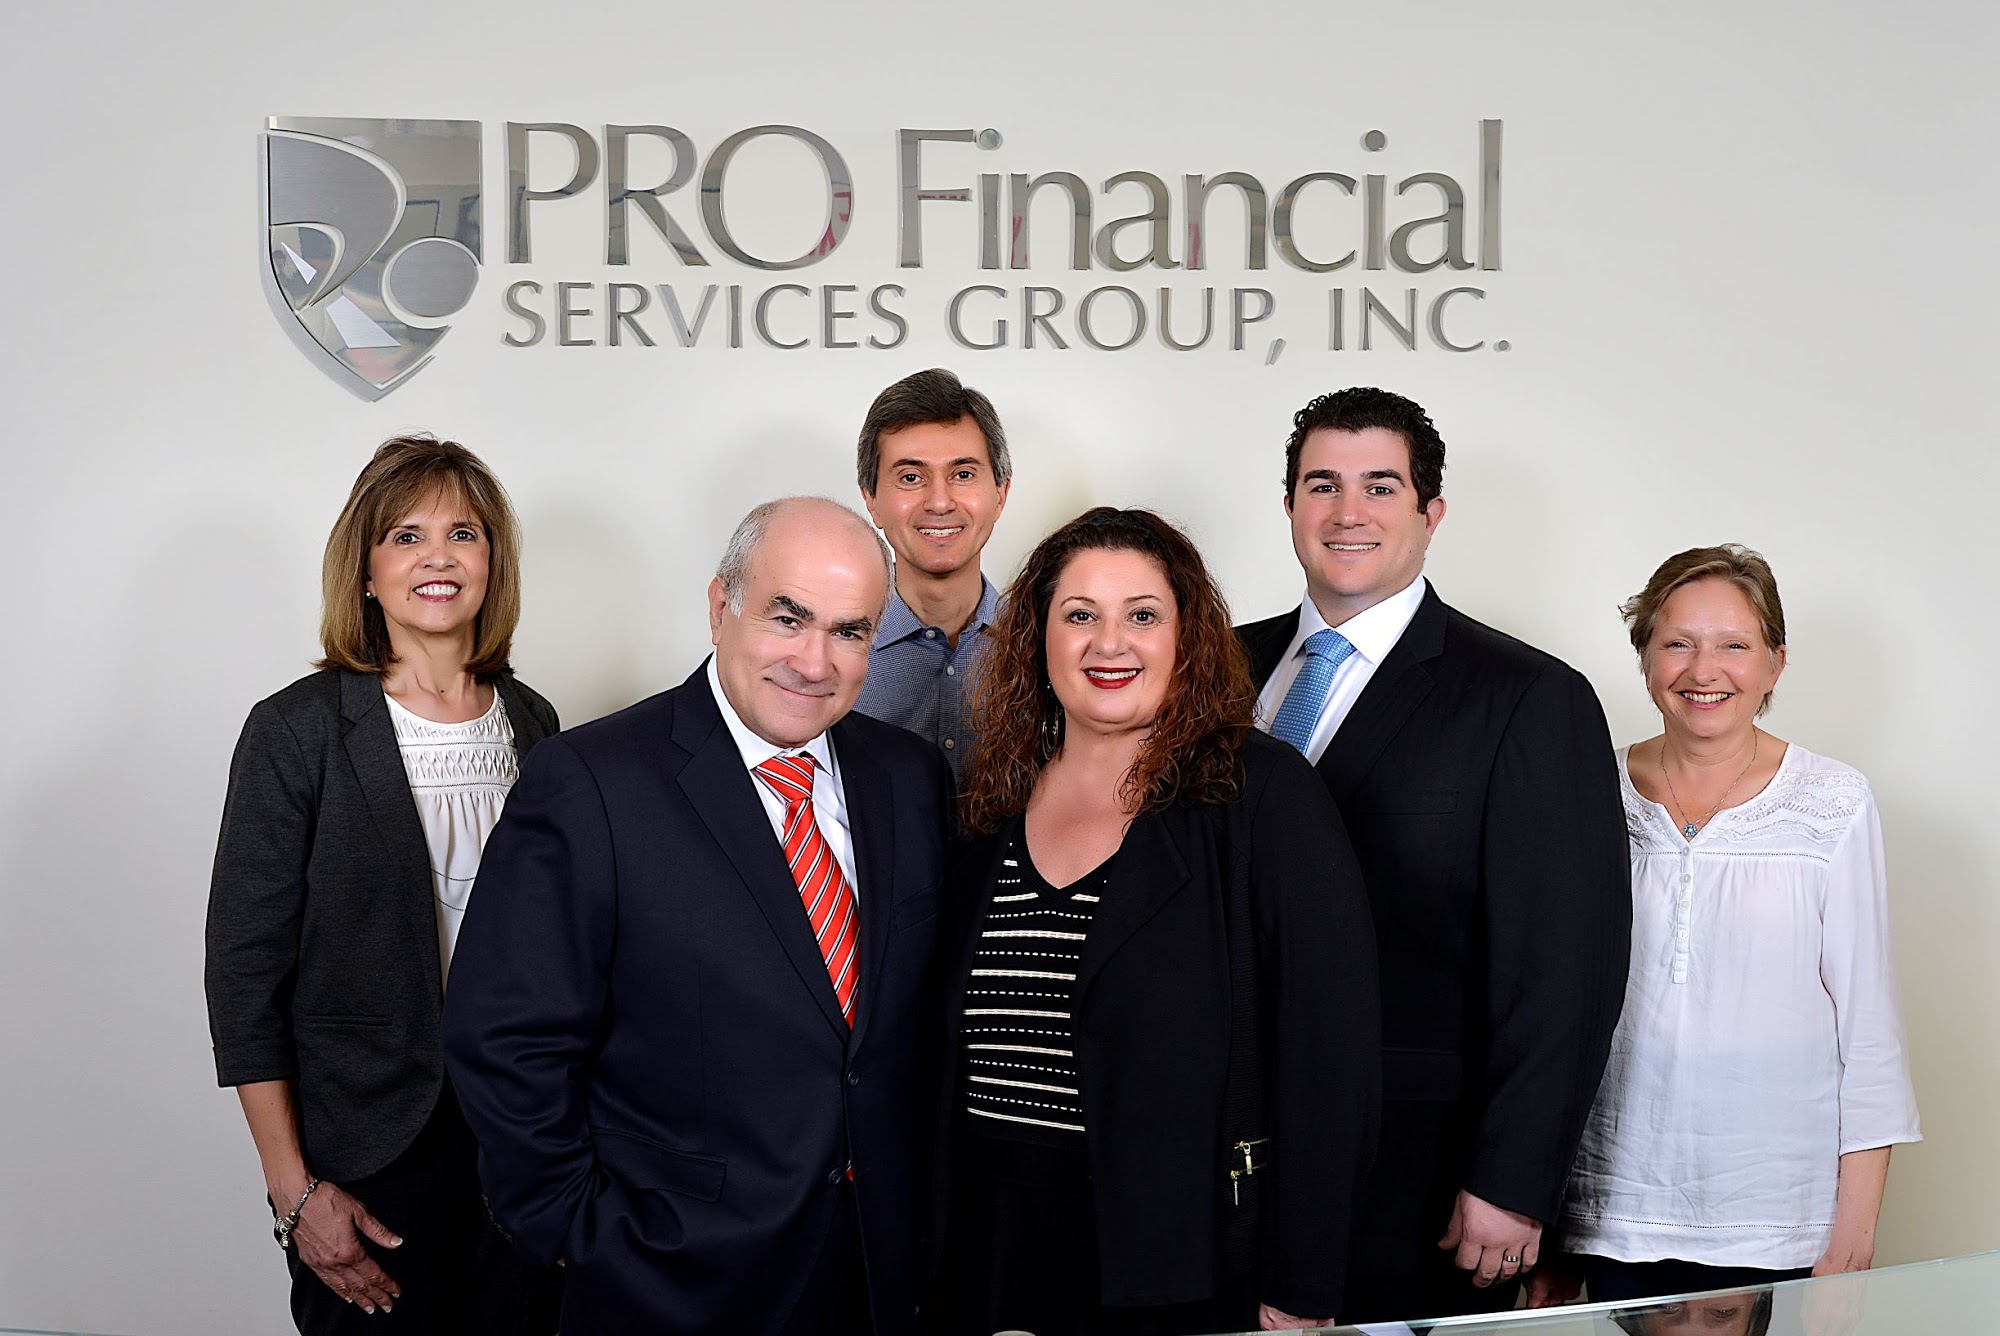 Pro Financial Services Group, Inc.